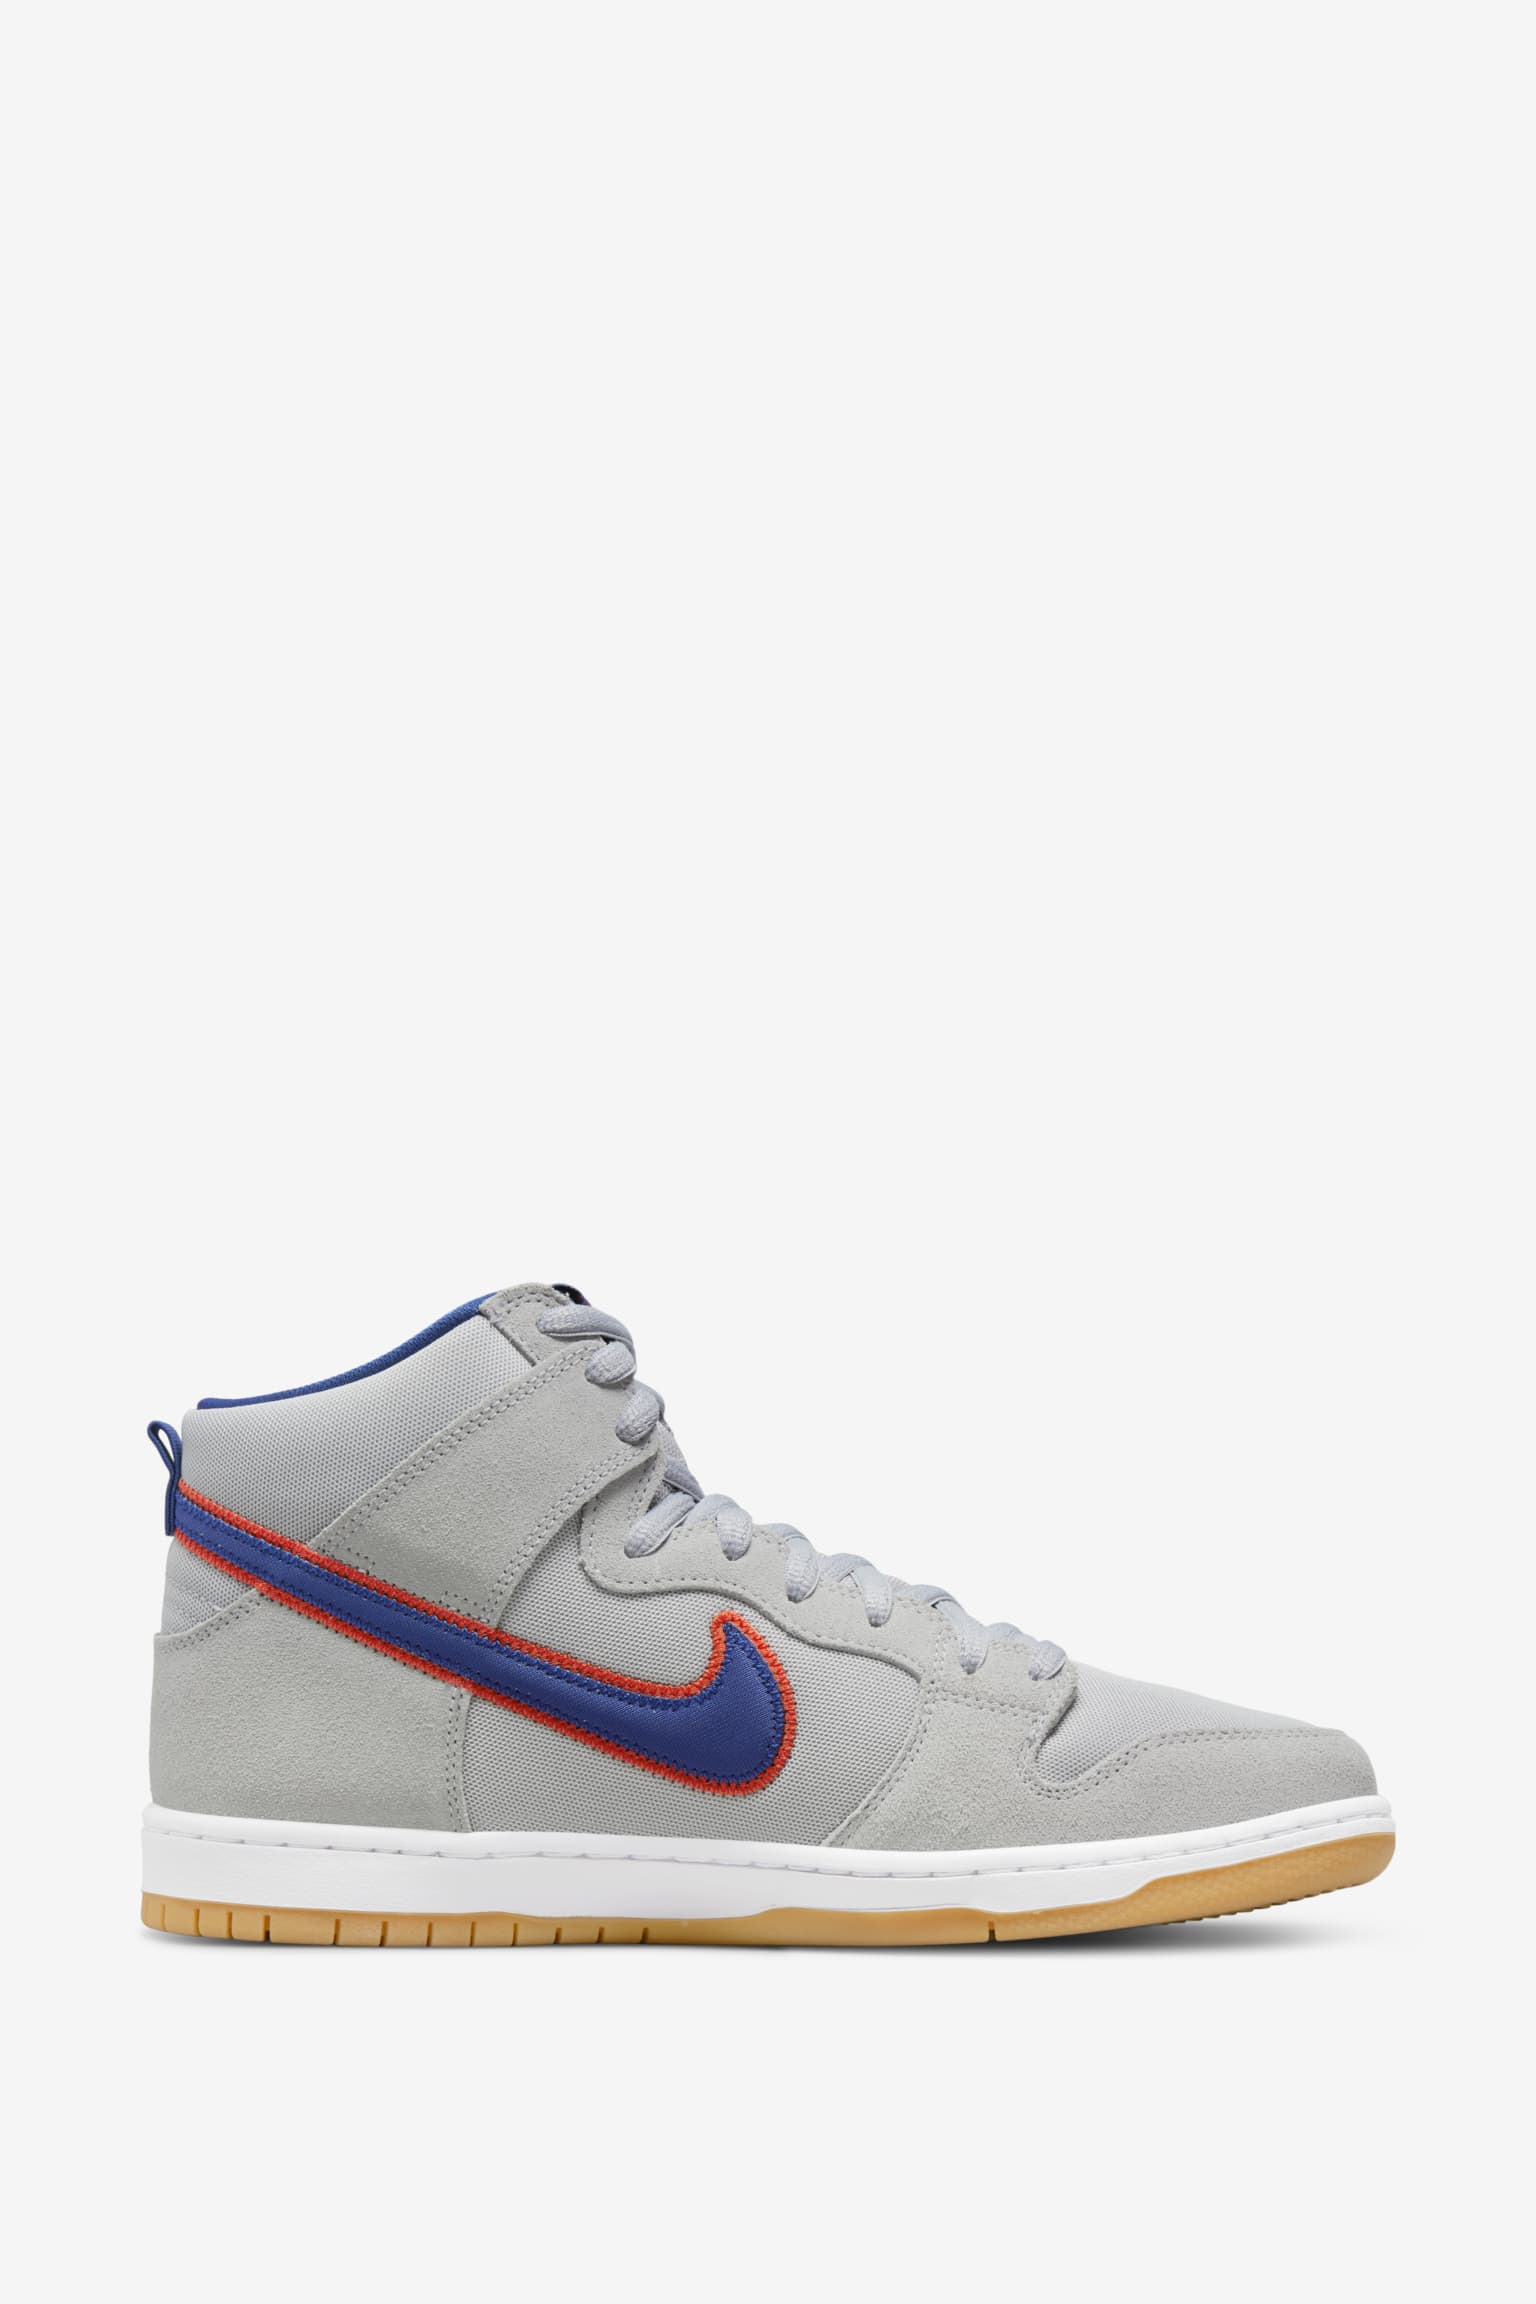 SB Dunk High 'Rush Blue and Team Orange' (DH7155-001) Release Date. Nike  SNKRS US